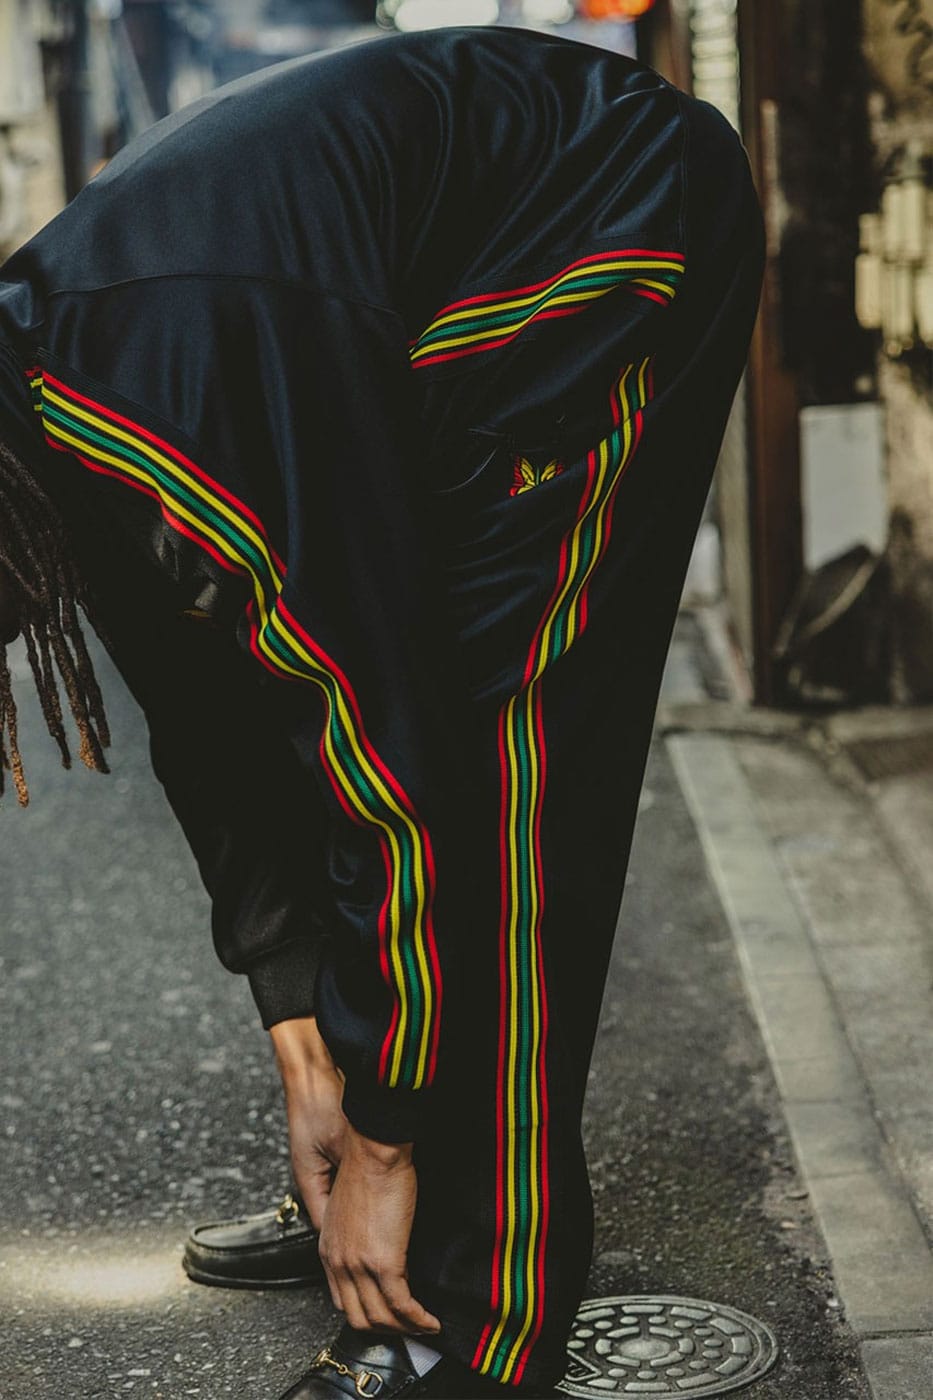 BEAMS to Release NEEDLES Rasta-Themed Tracksuits | HYPEBEAST